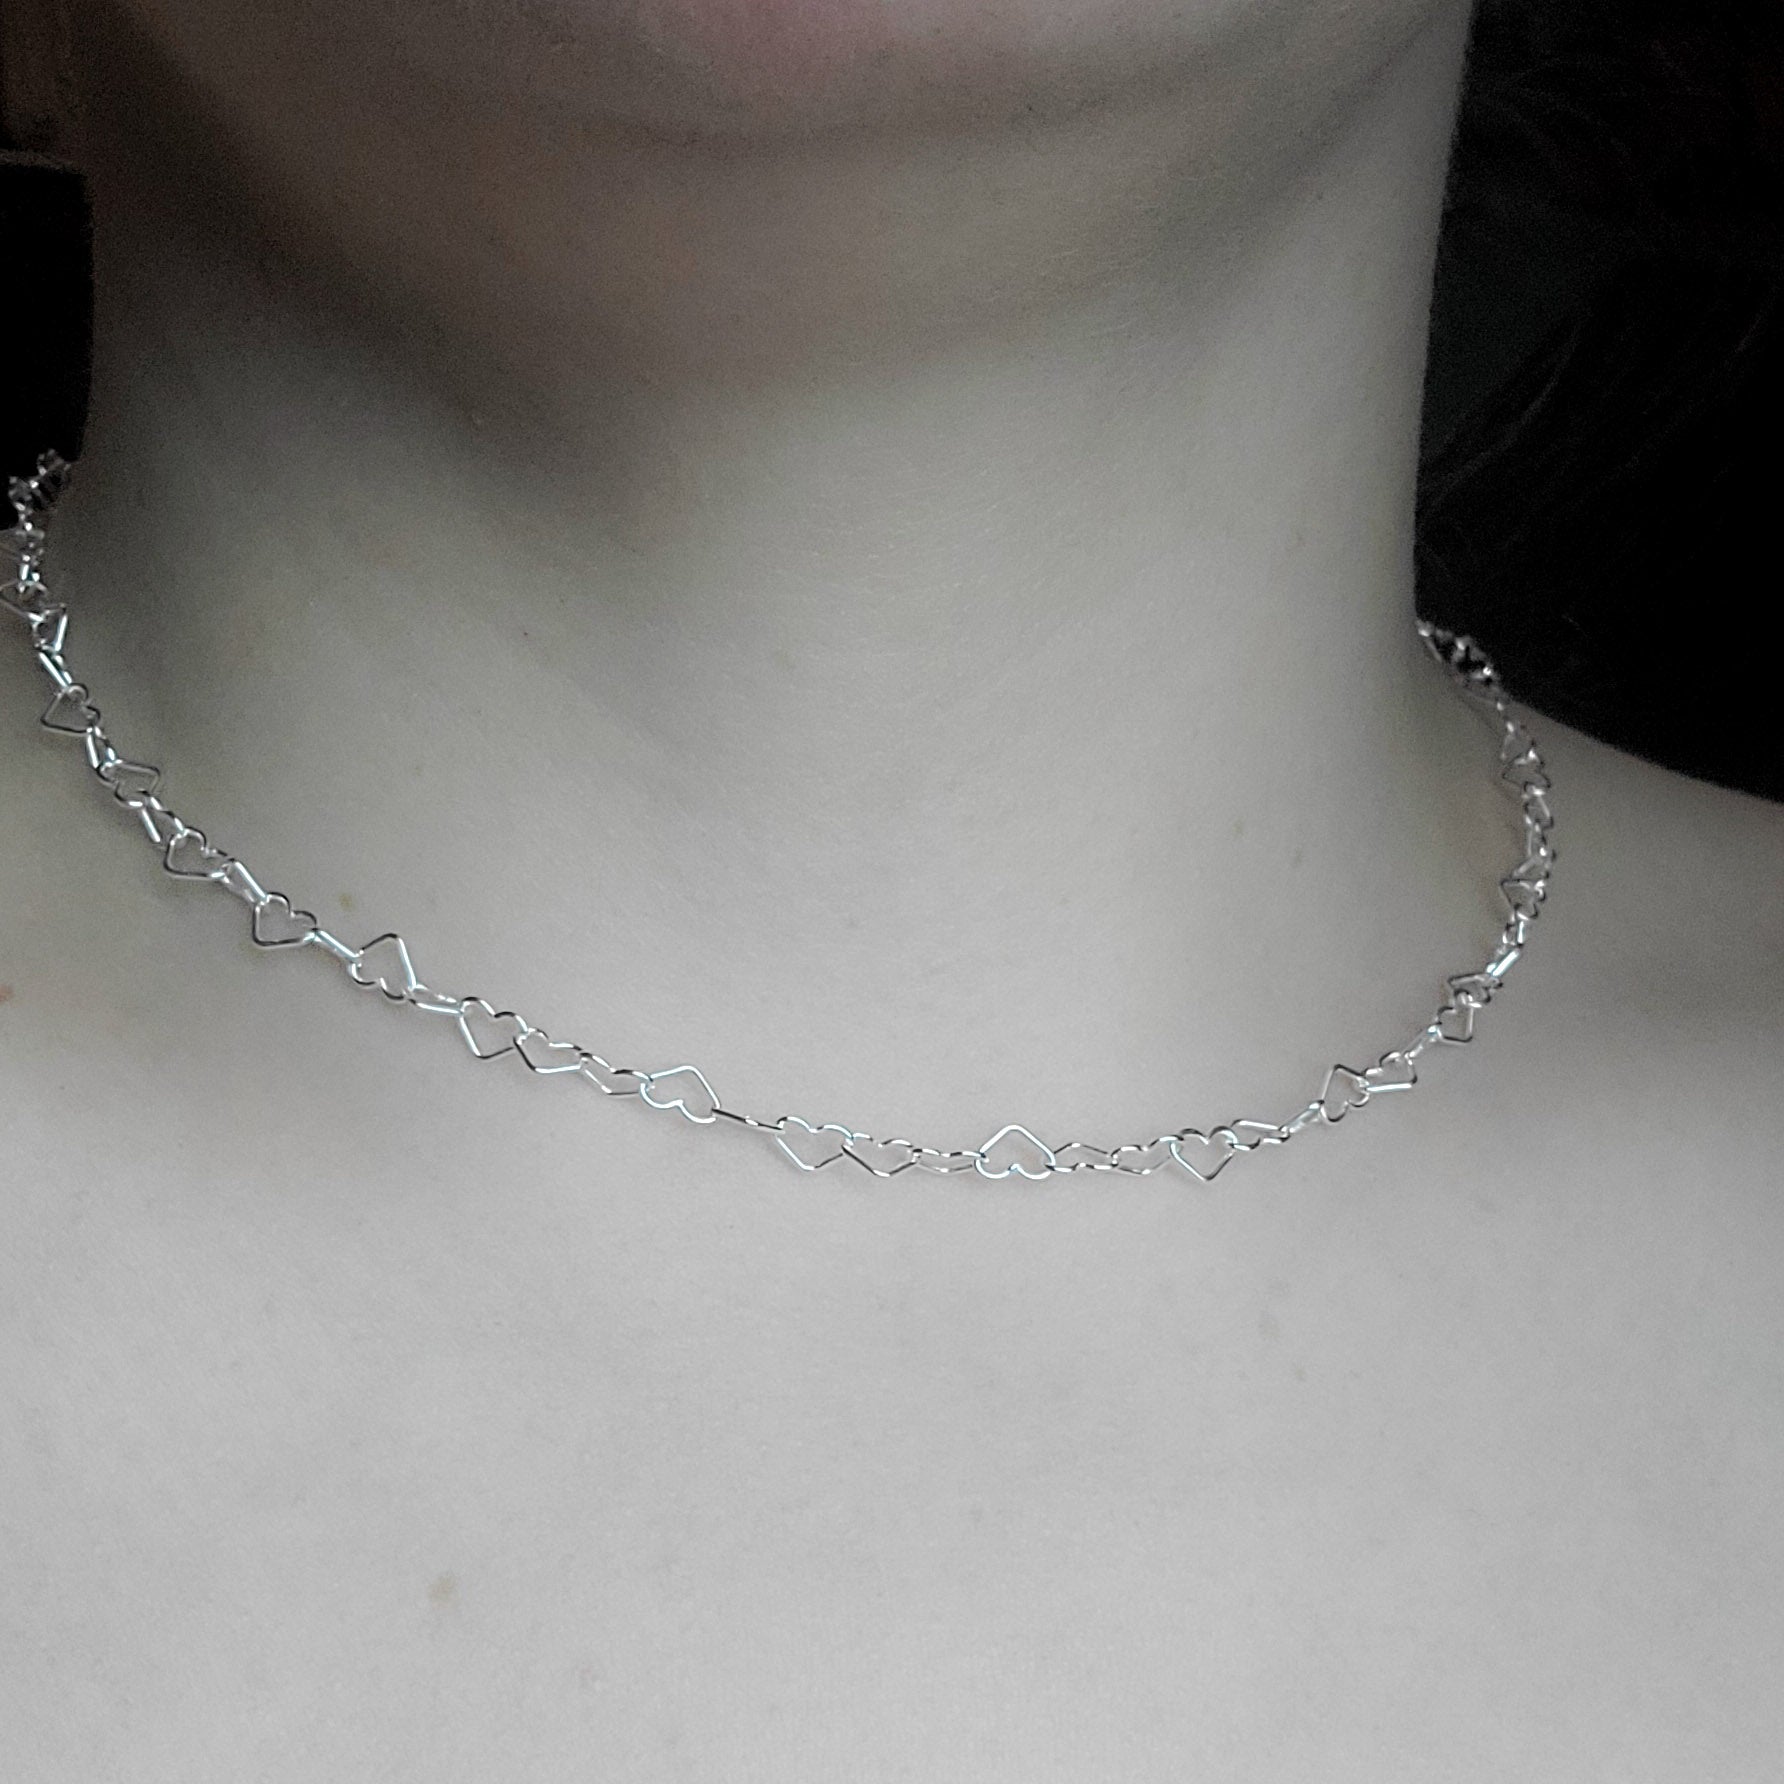 Tiny Heart Chain, Sterling Silver Heart Necklace